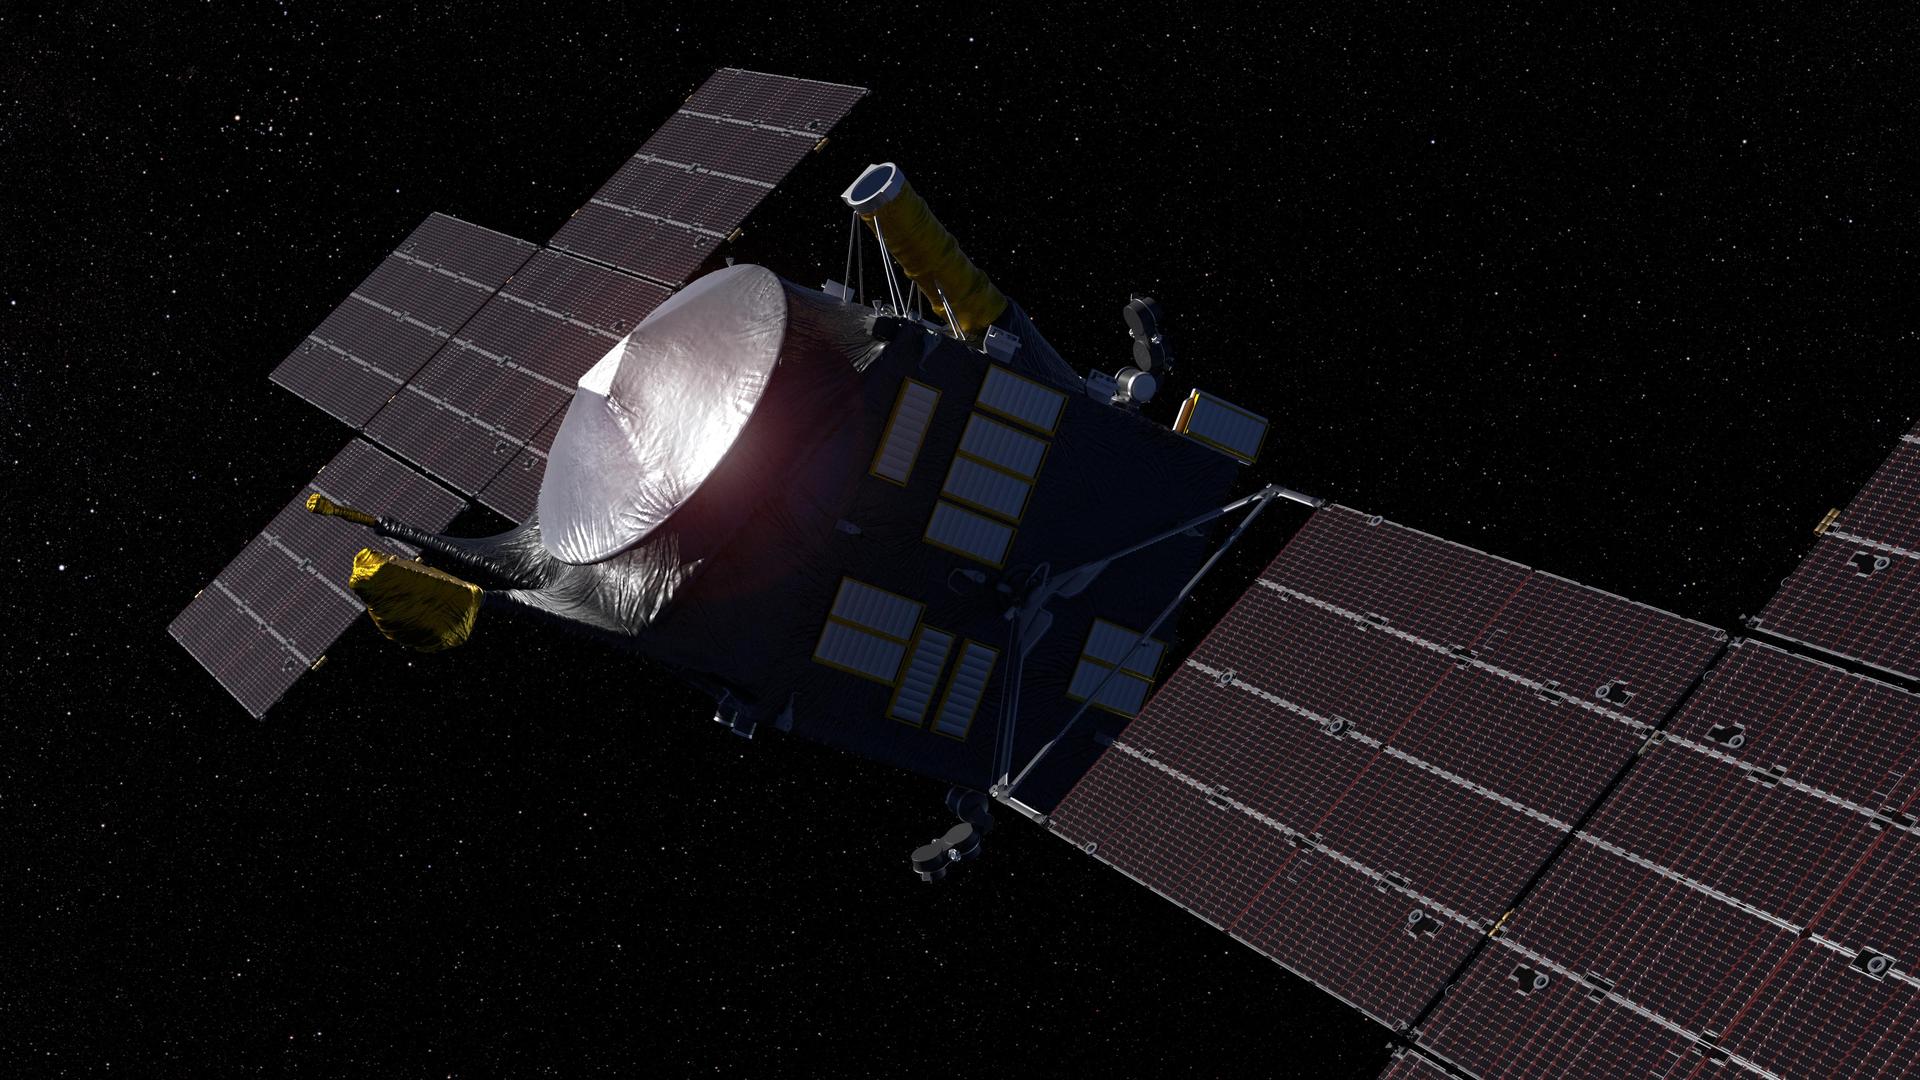 An illustration of the Psyche spacecraft in space with its solar wings expanded.